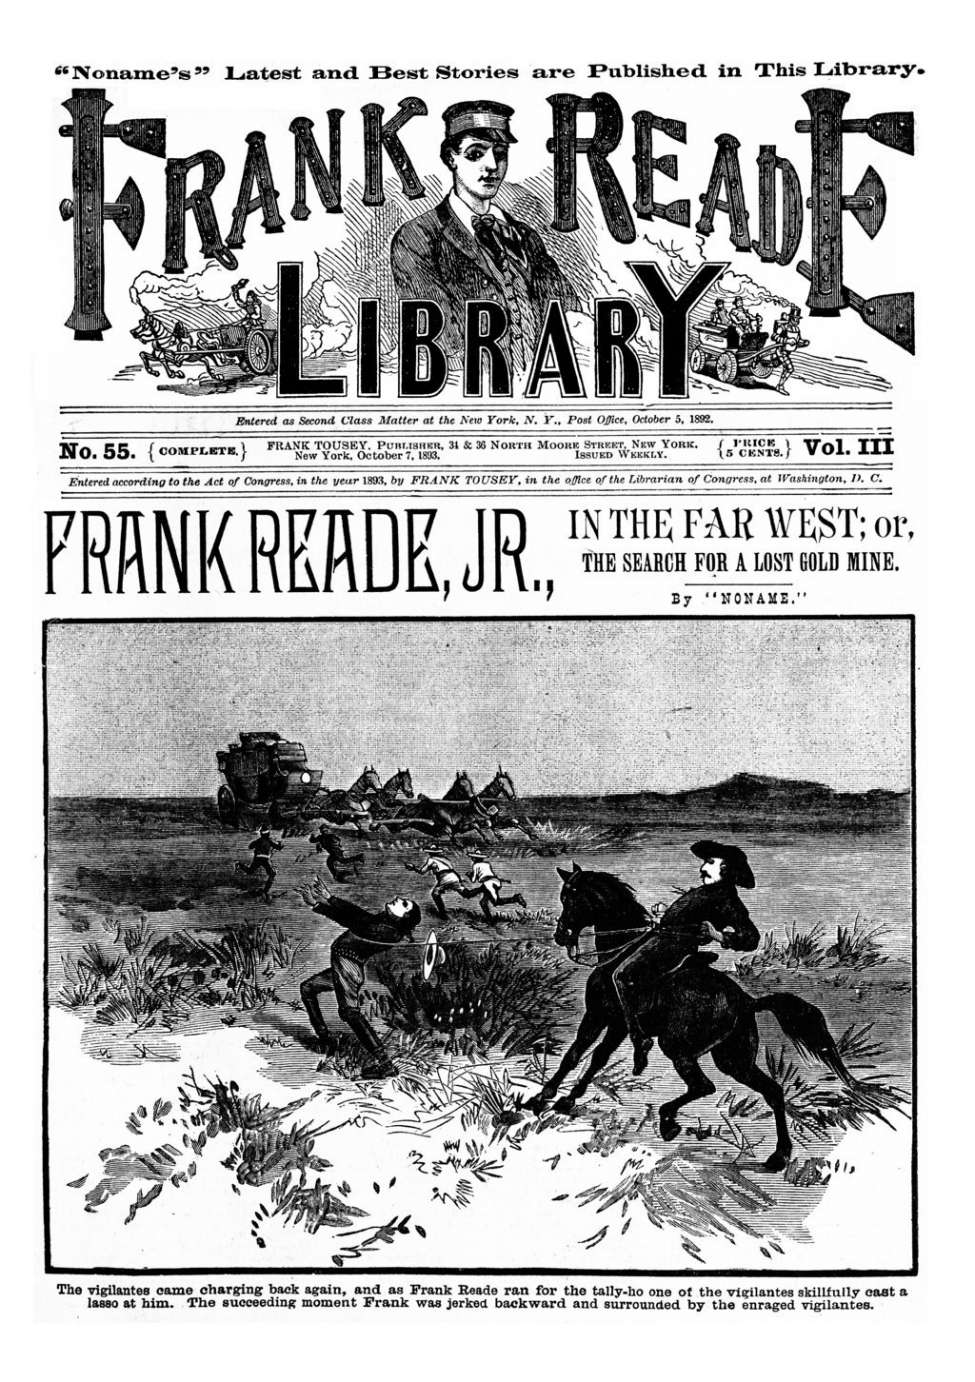 Comic Book Cover For v03 55 - Frank Reade Jr. in the Far West